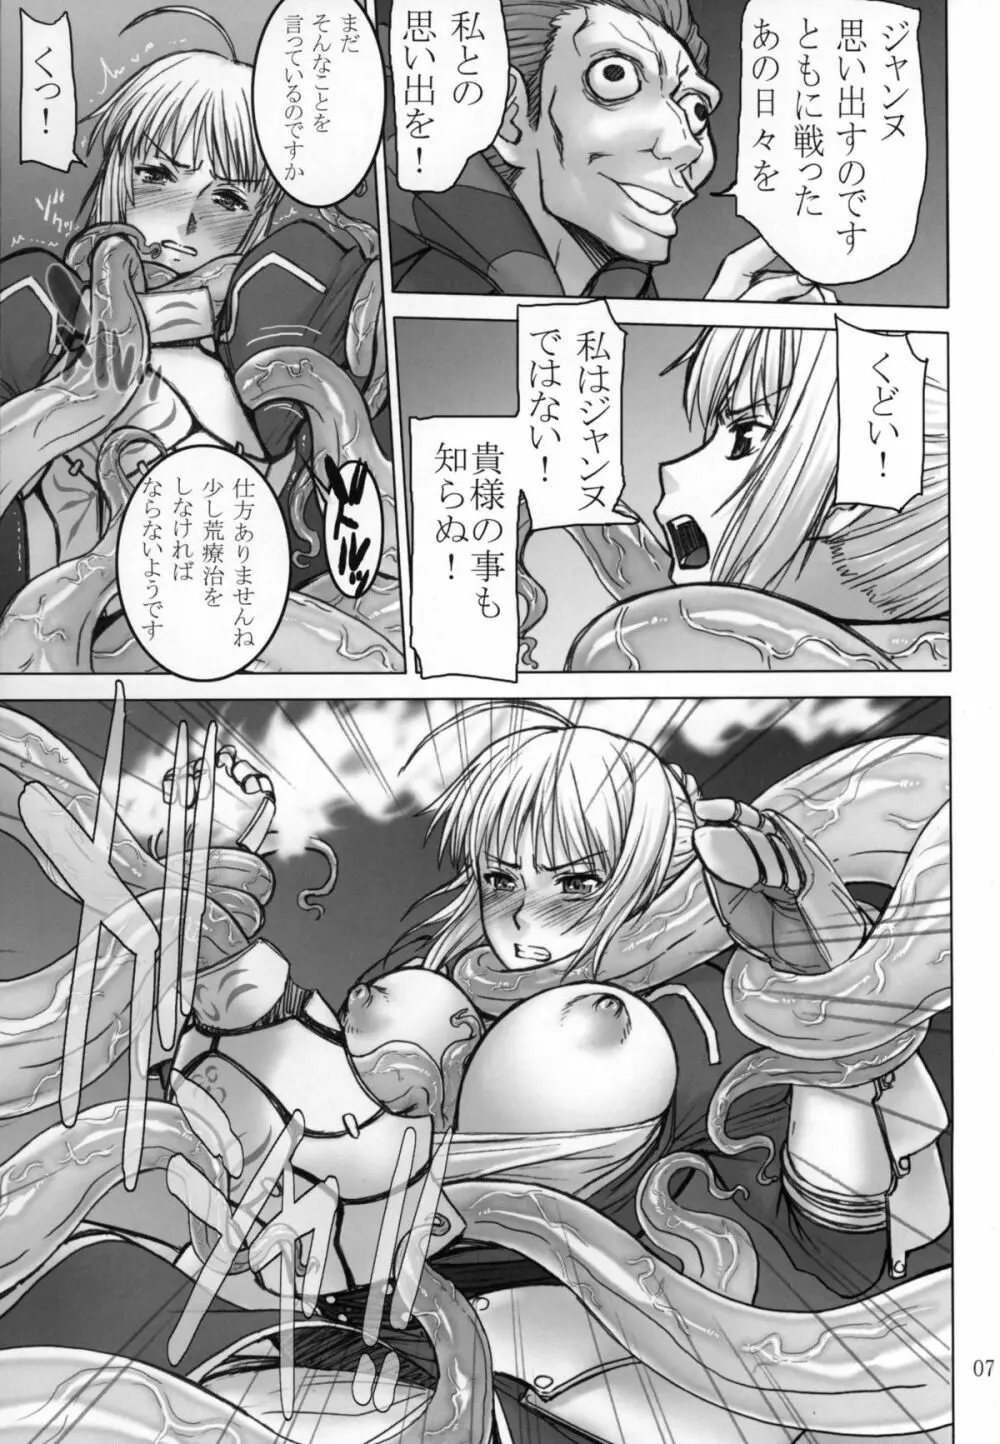 Fate/thrust - page7